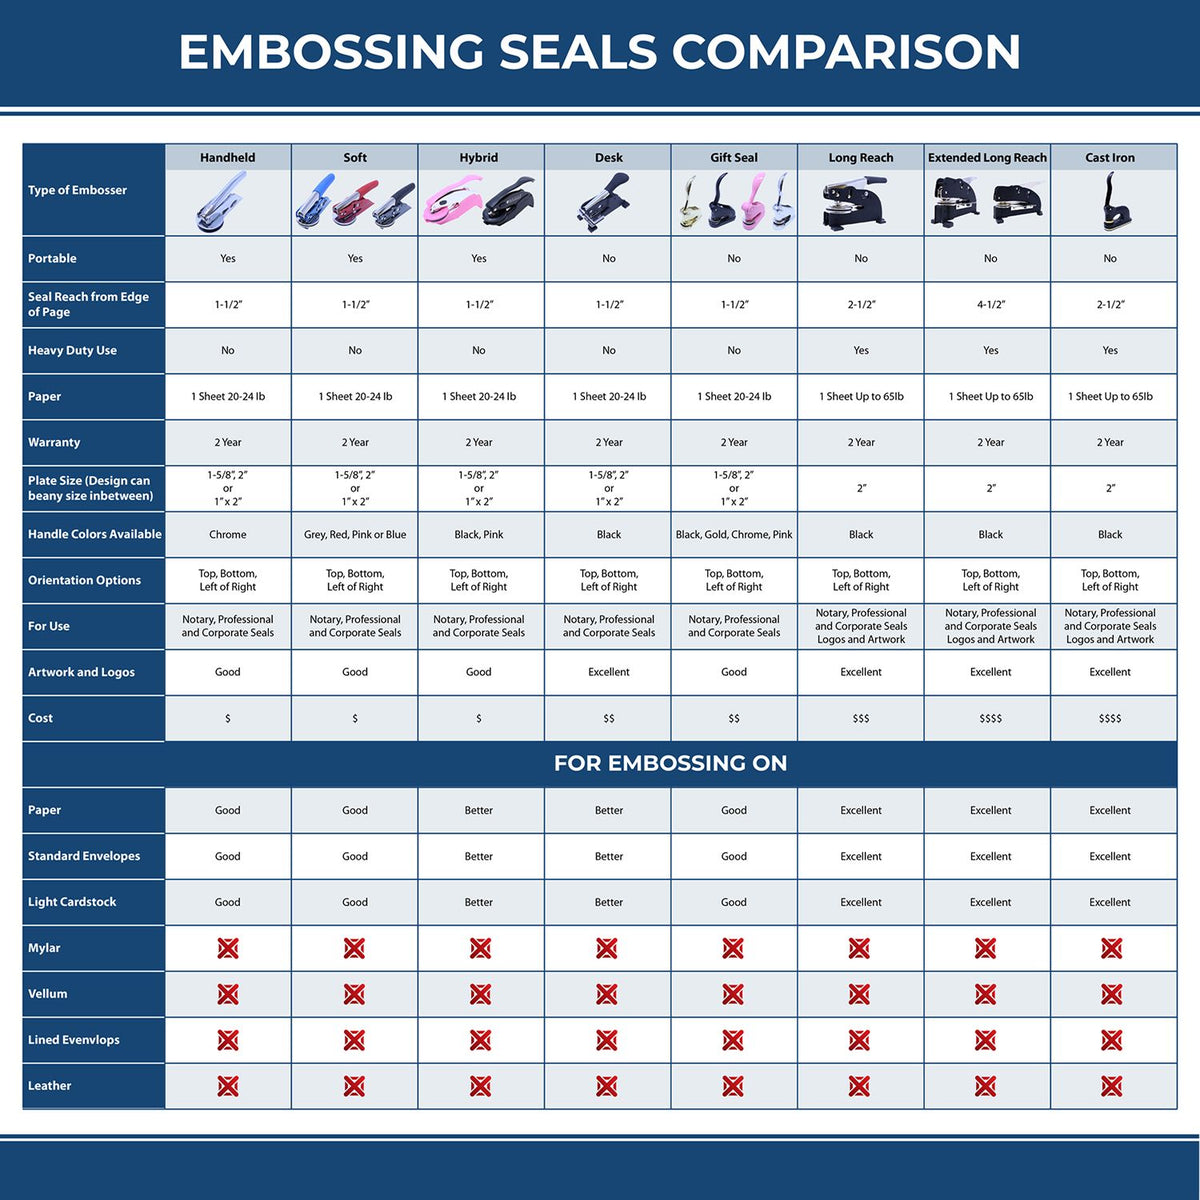 A comparison chart for the different types of mount models available for the State of Nevada Long Reach Architectural Embossing Seal.